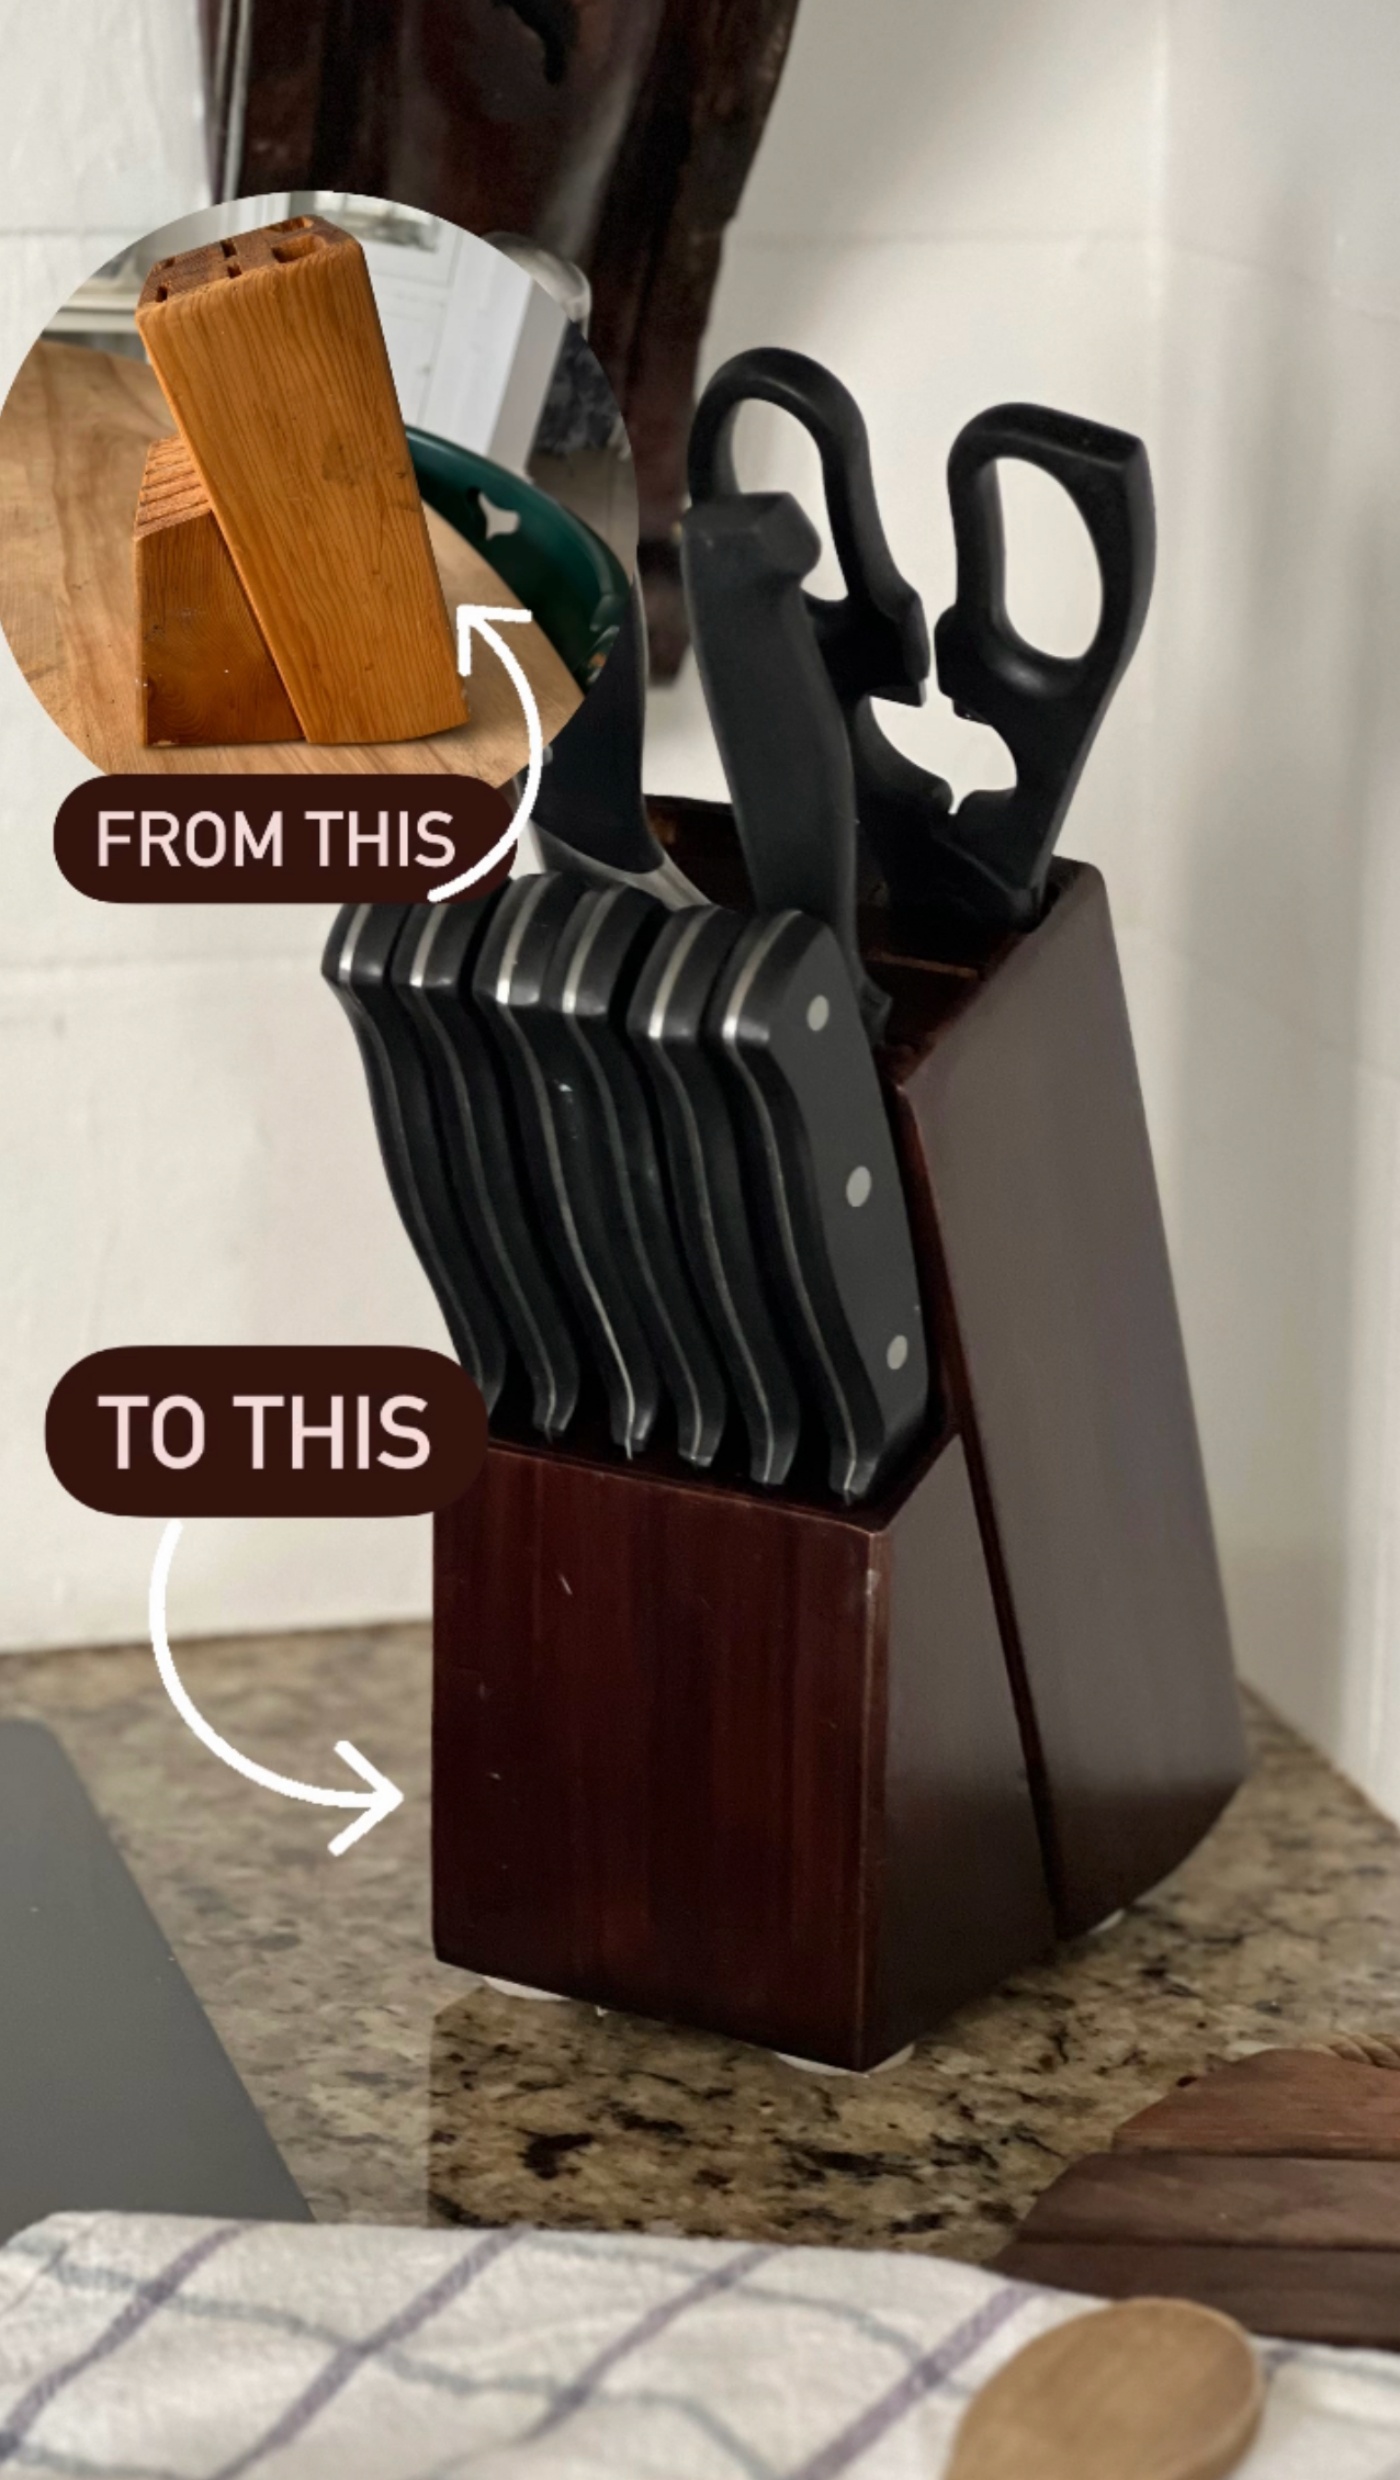 I just bought a new knife set and was thinking this post may help